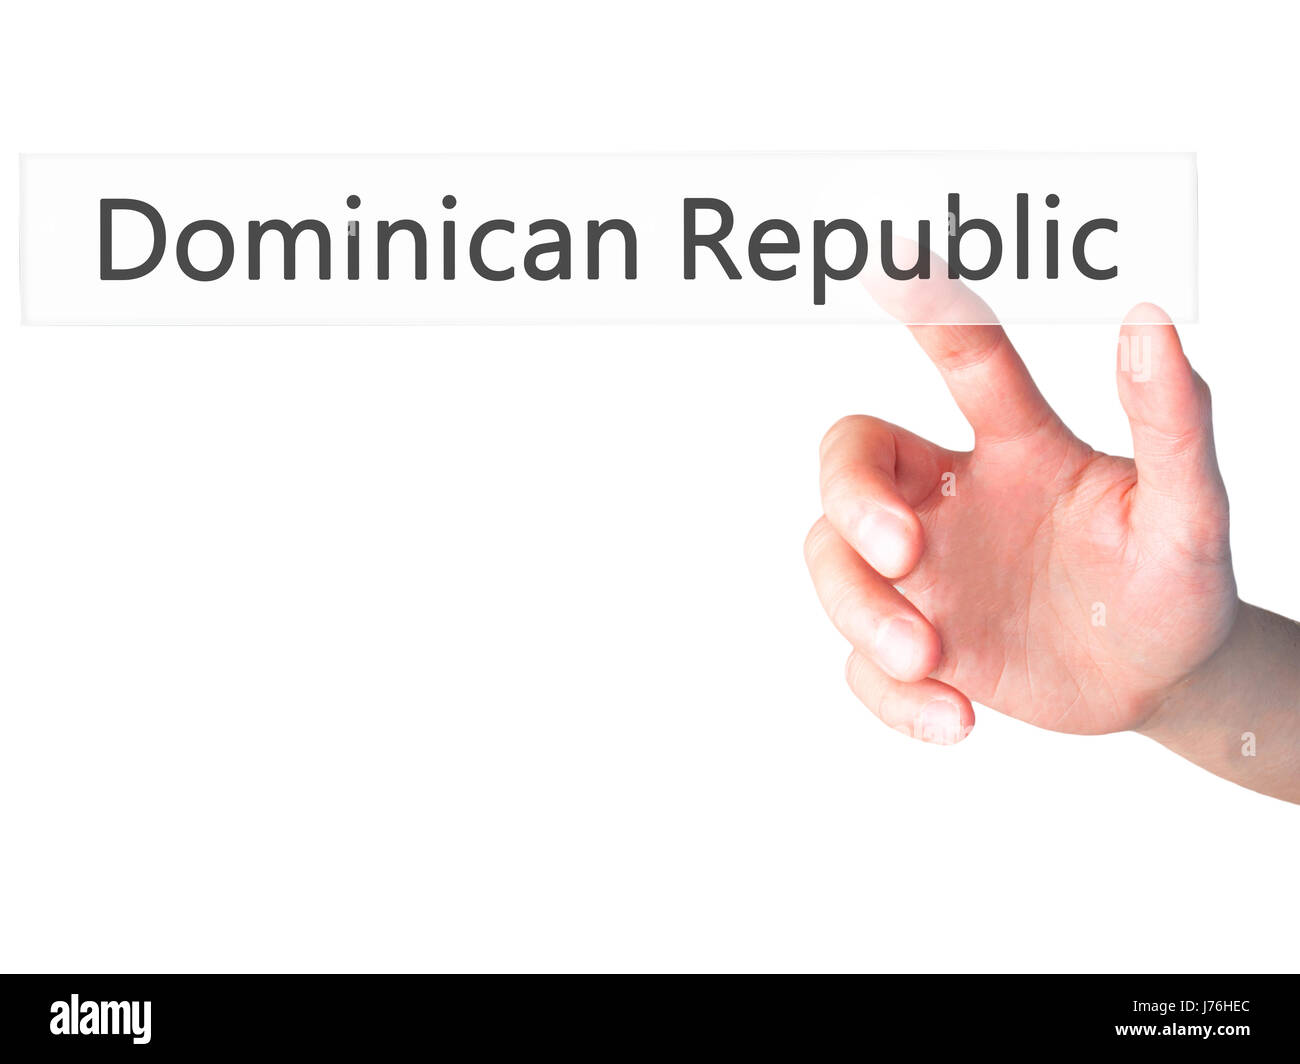 Dominican Republic - Hand pressing a button on blurred background concept . Business, technology, internet concept. Stock Photo Stock Photo